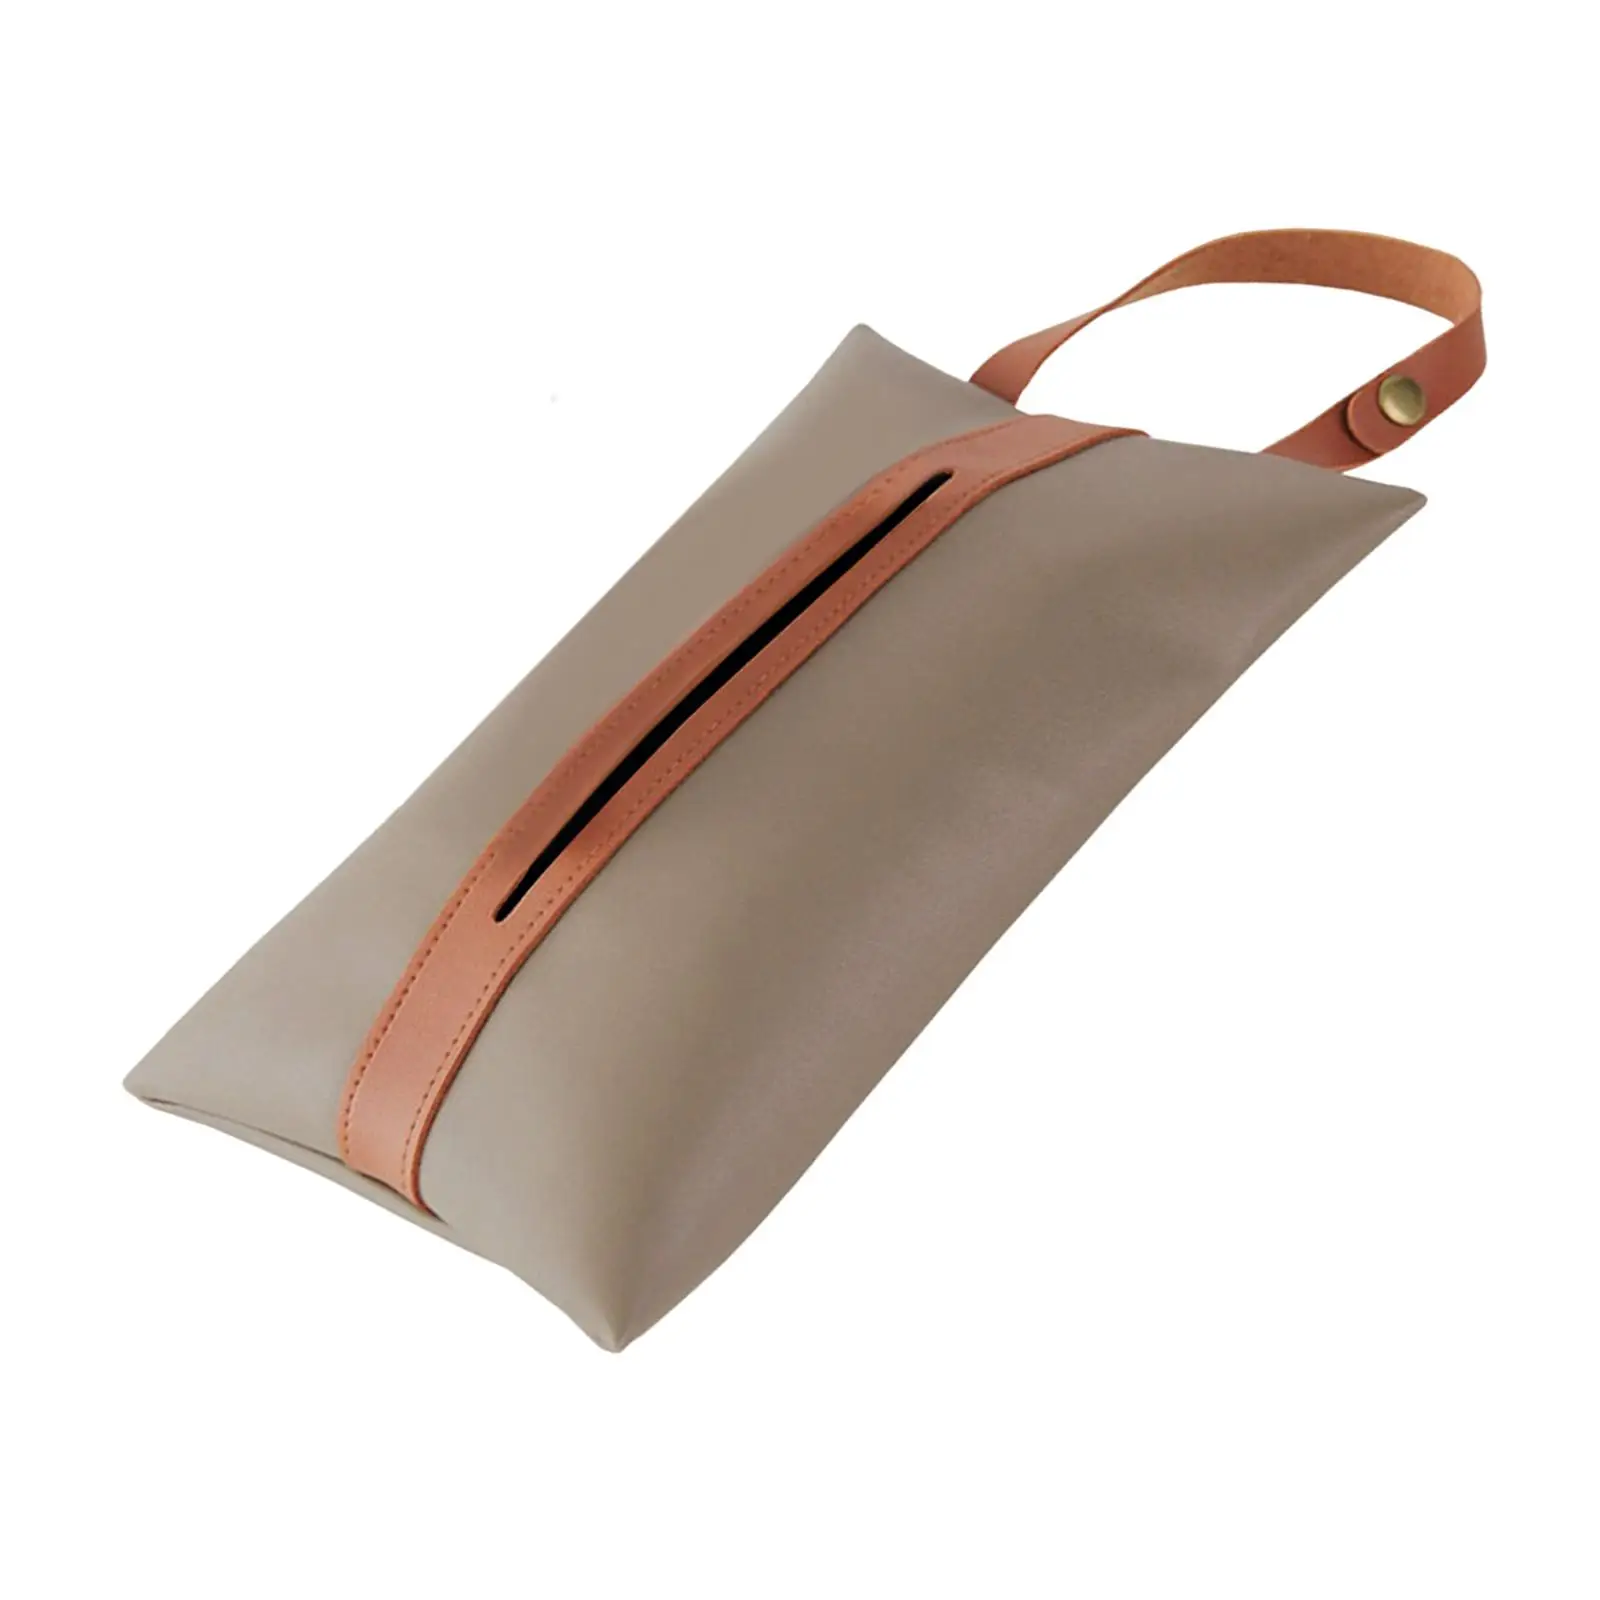 PU Leather paper Bag Holder Multifunctional Lightweight Table Decoration Concise tissue Box for Living Room Bathrooms